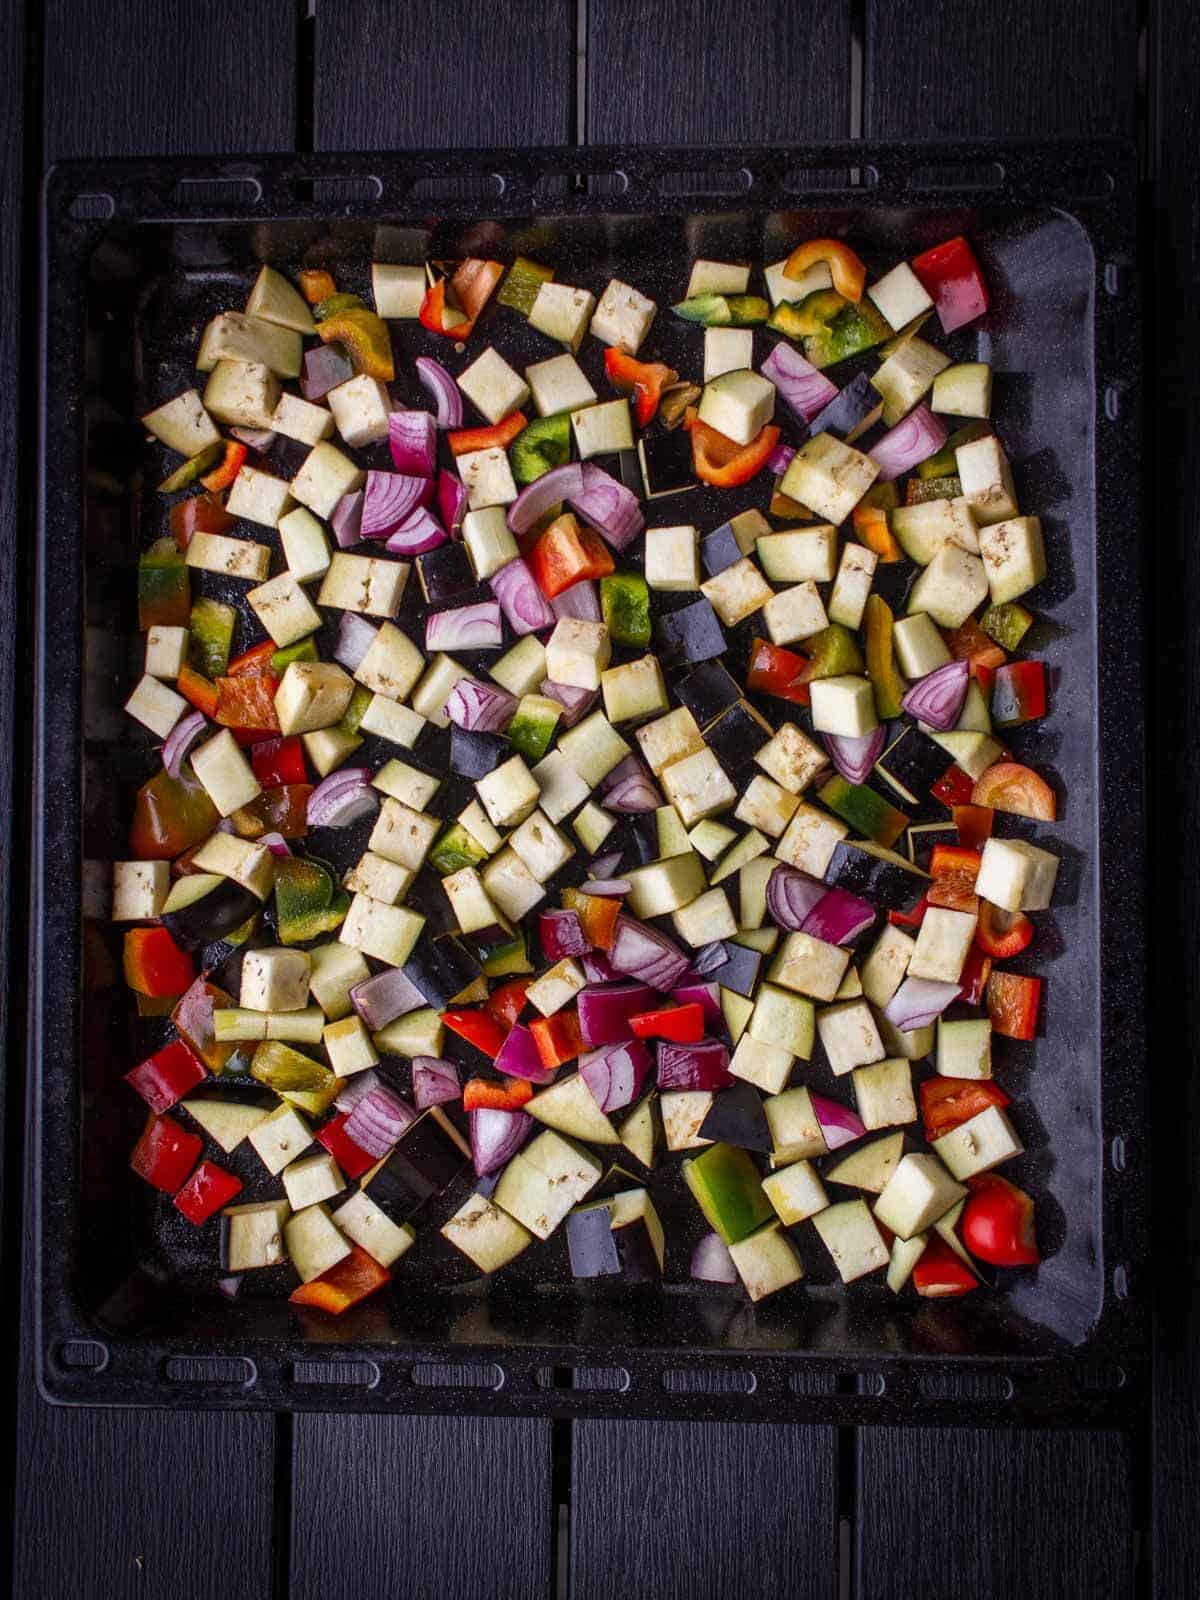 diced veggies to grill